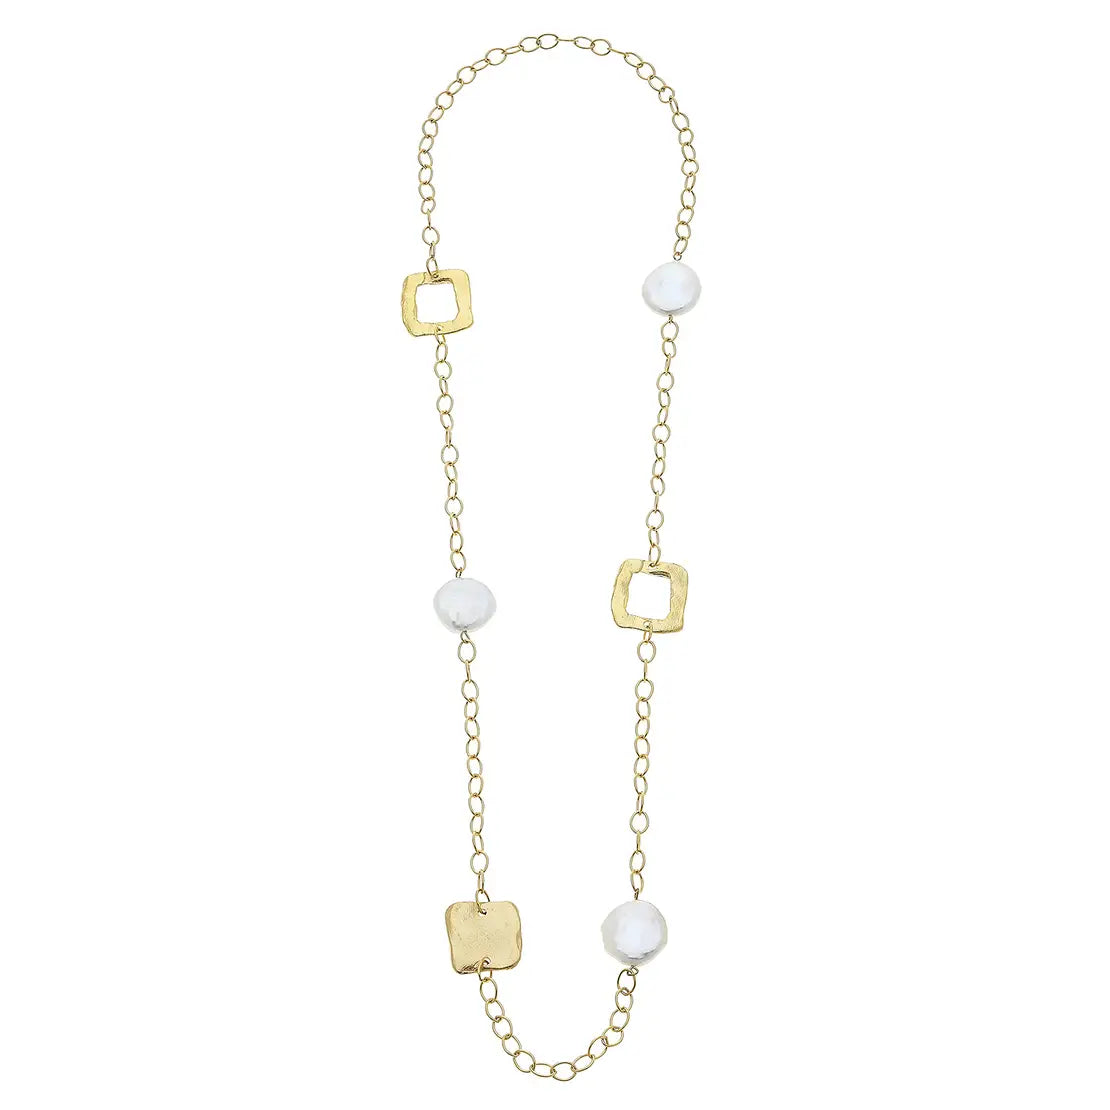 Gold Square and Genuine Large Coin Pearl Chain Necklace